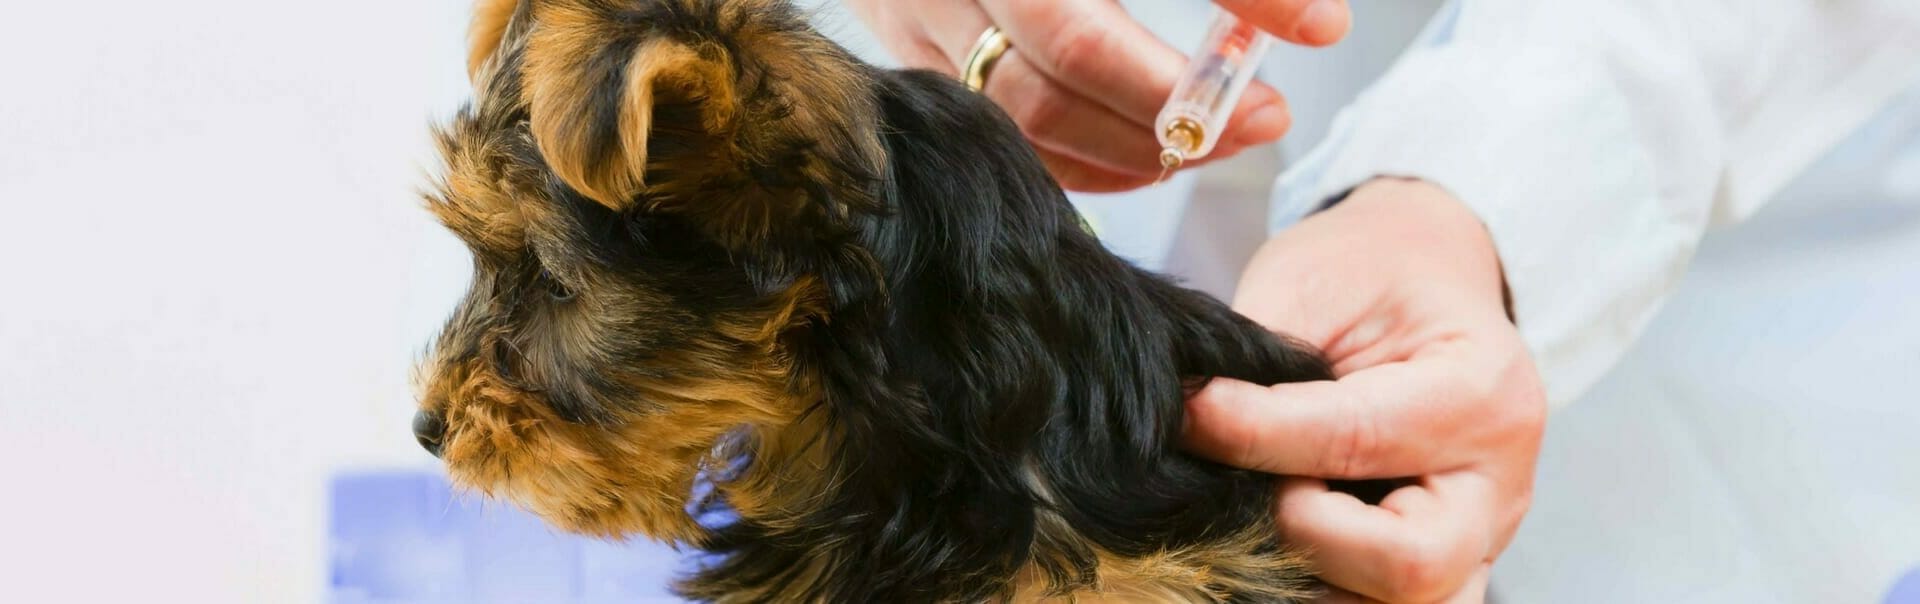 Vaccinations for Puppies and Dogs